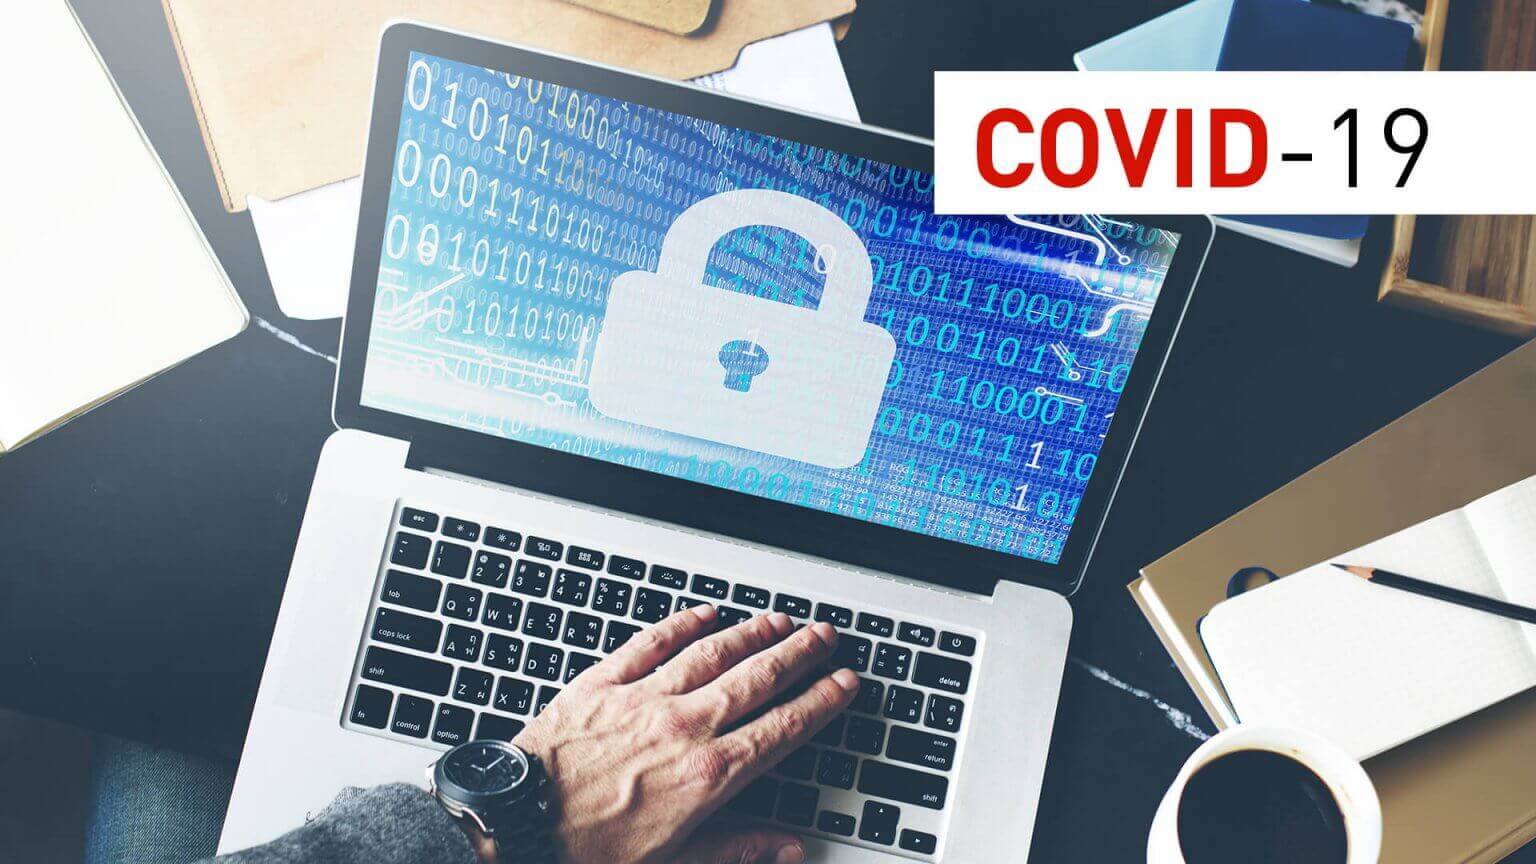 Covid-19 Pandemic And The Protection Of Personal Data, Turkey Law Firm